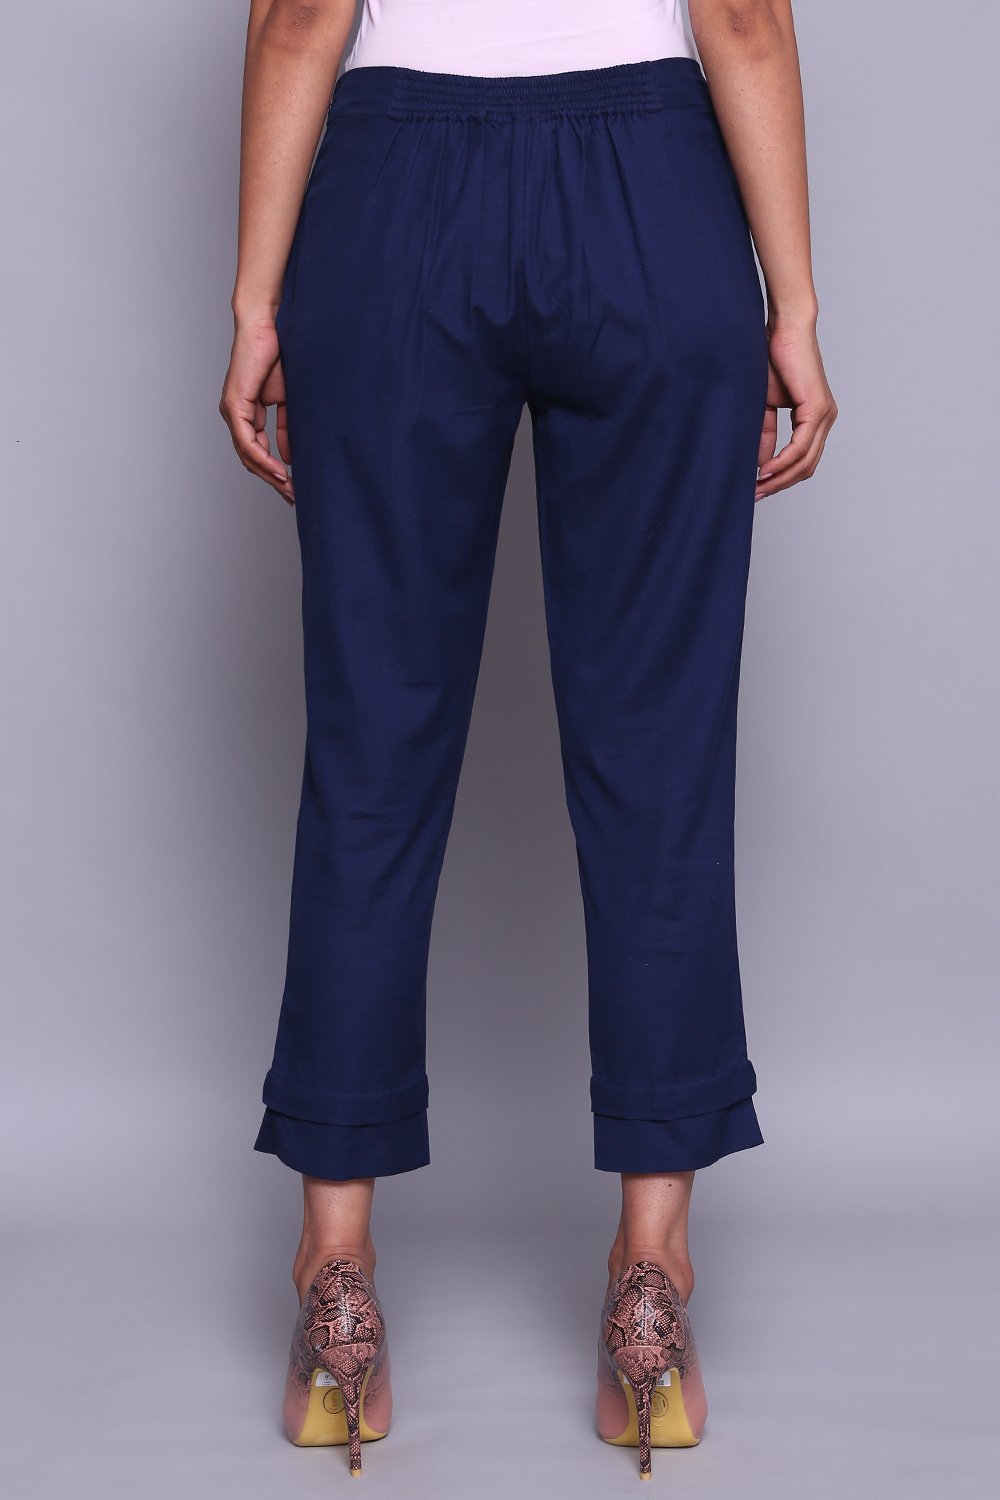 Navy Blue Cotton Flax Pants image number 7